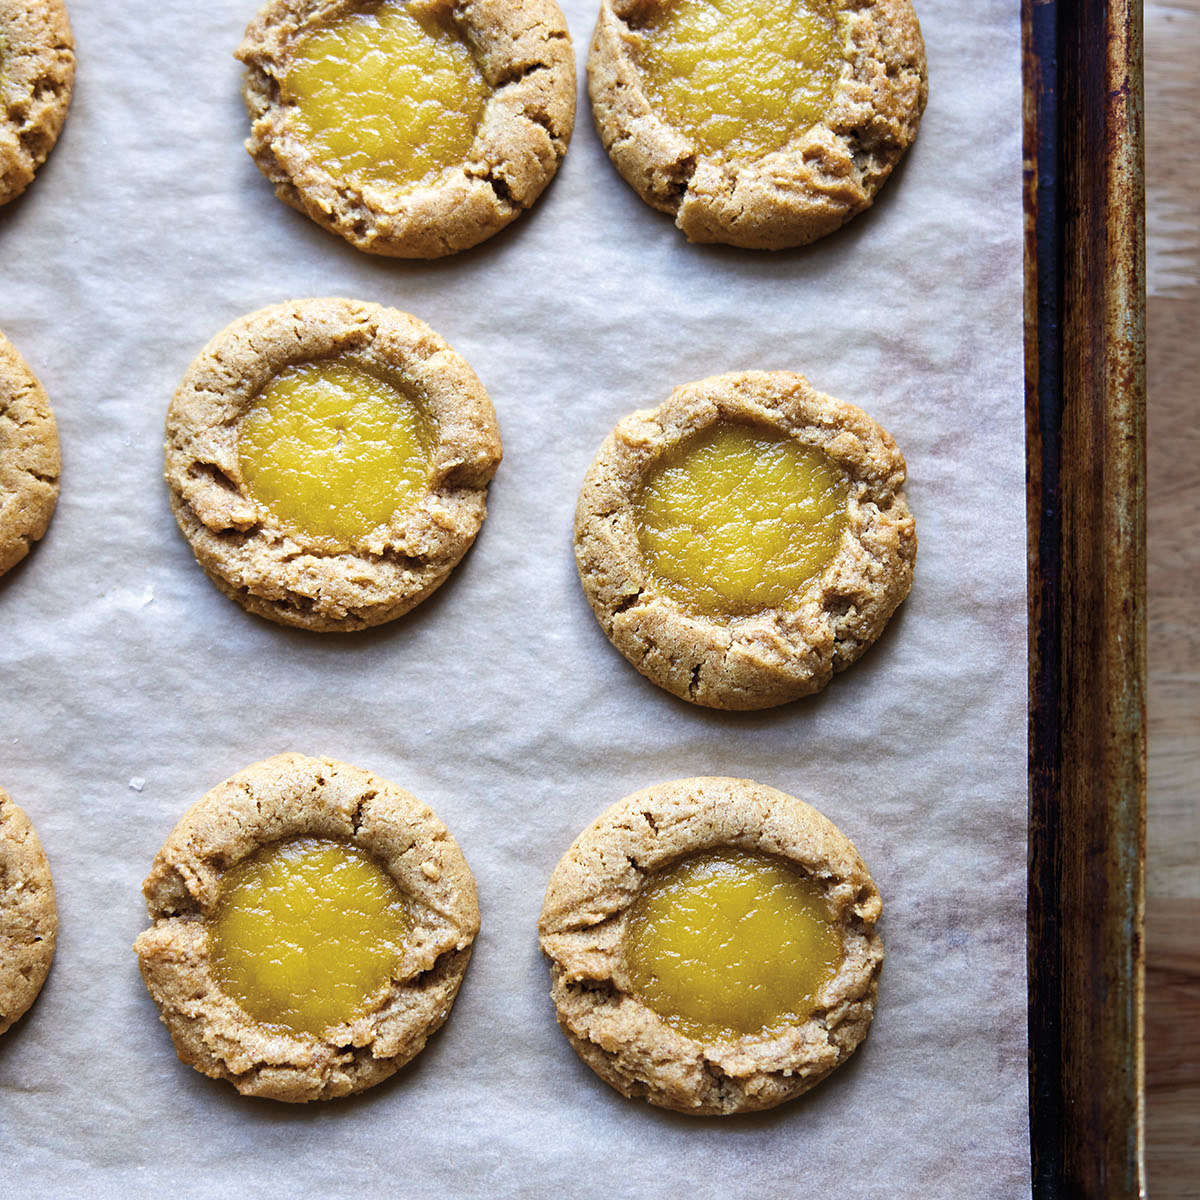 Golden brown cookies on a parchment-lined sheet with a bright yellow center